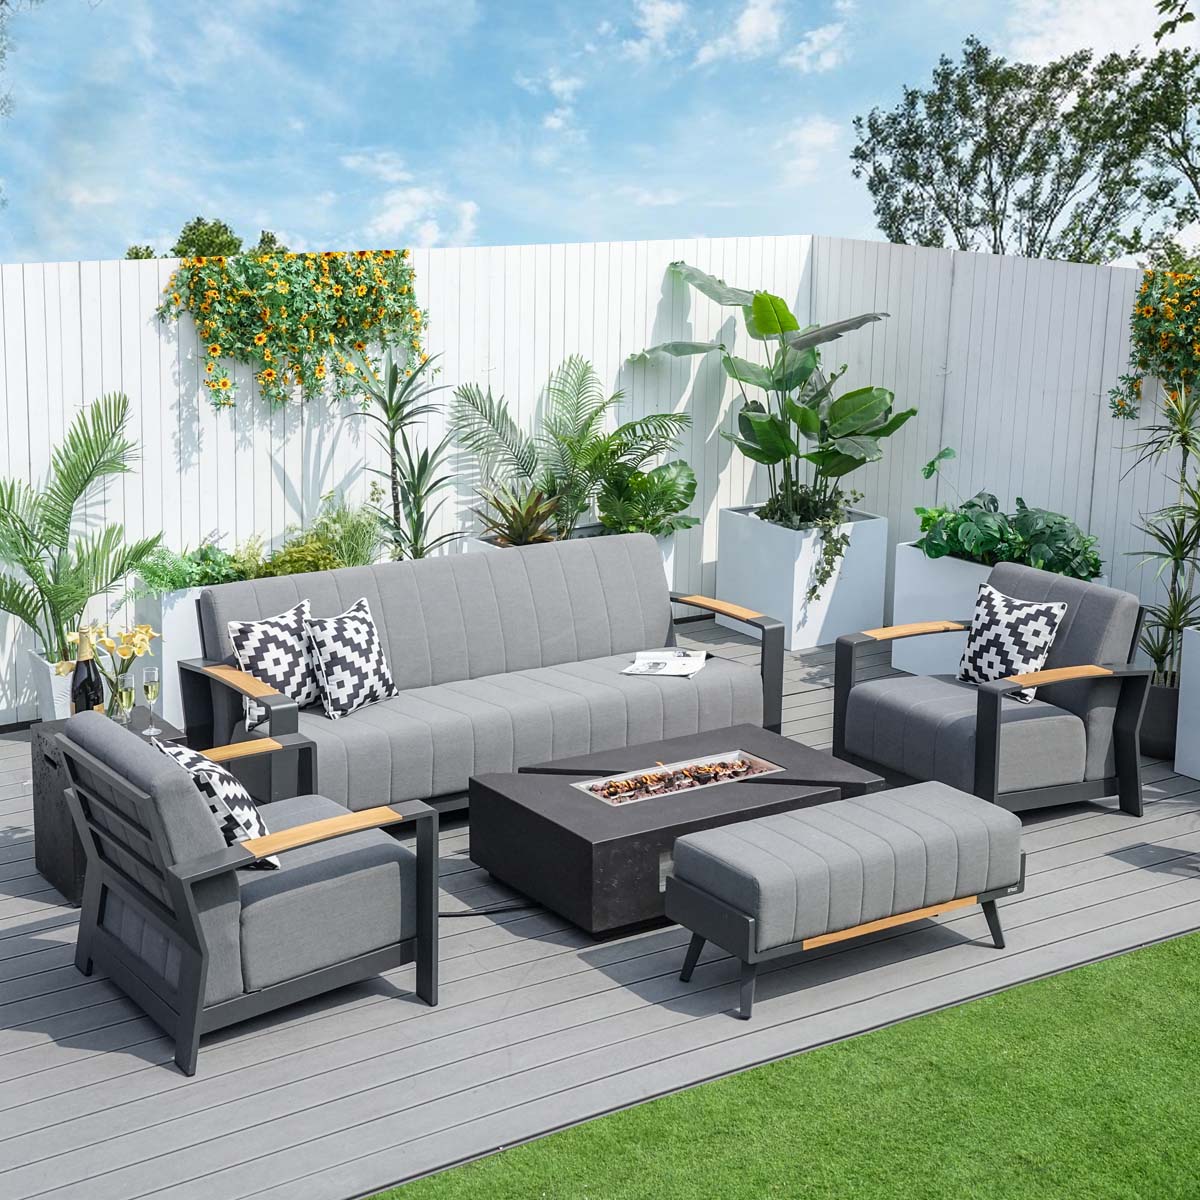 The latest furniture on the market - Abrihome 6-Pieces Patio Garden Aluminum Seating Set with Fire Pit